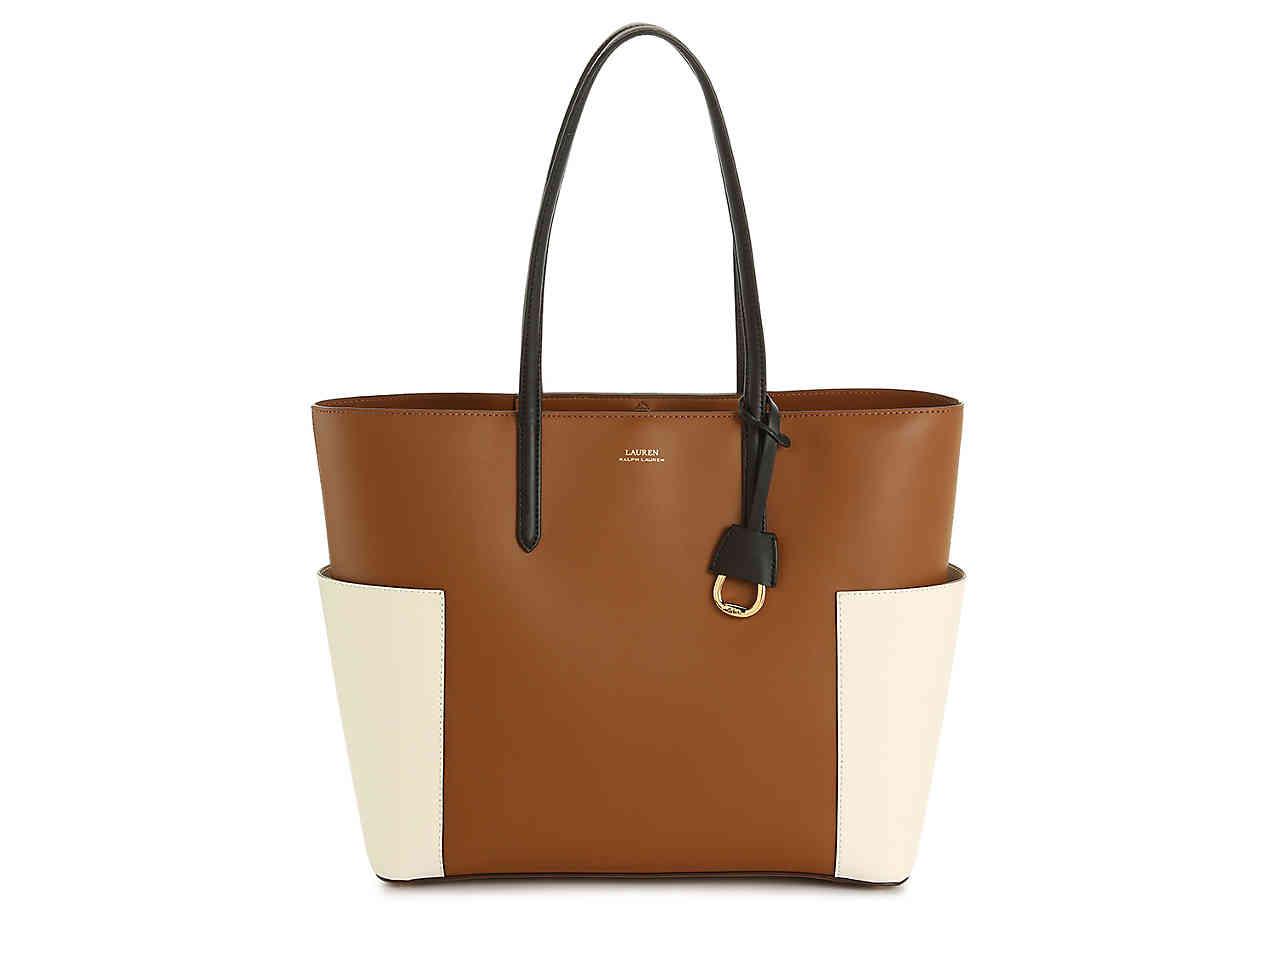 Lauren by Ralph Lauren Carlyle Colorblock Large Leather Tote Bag in Brown -  Lyst